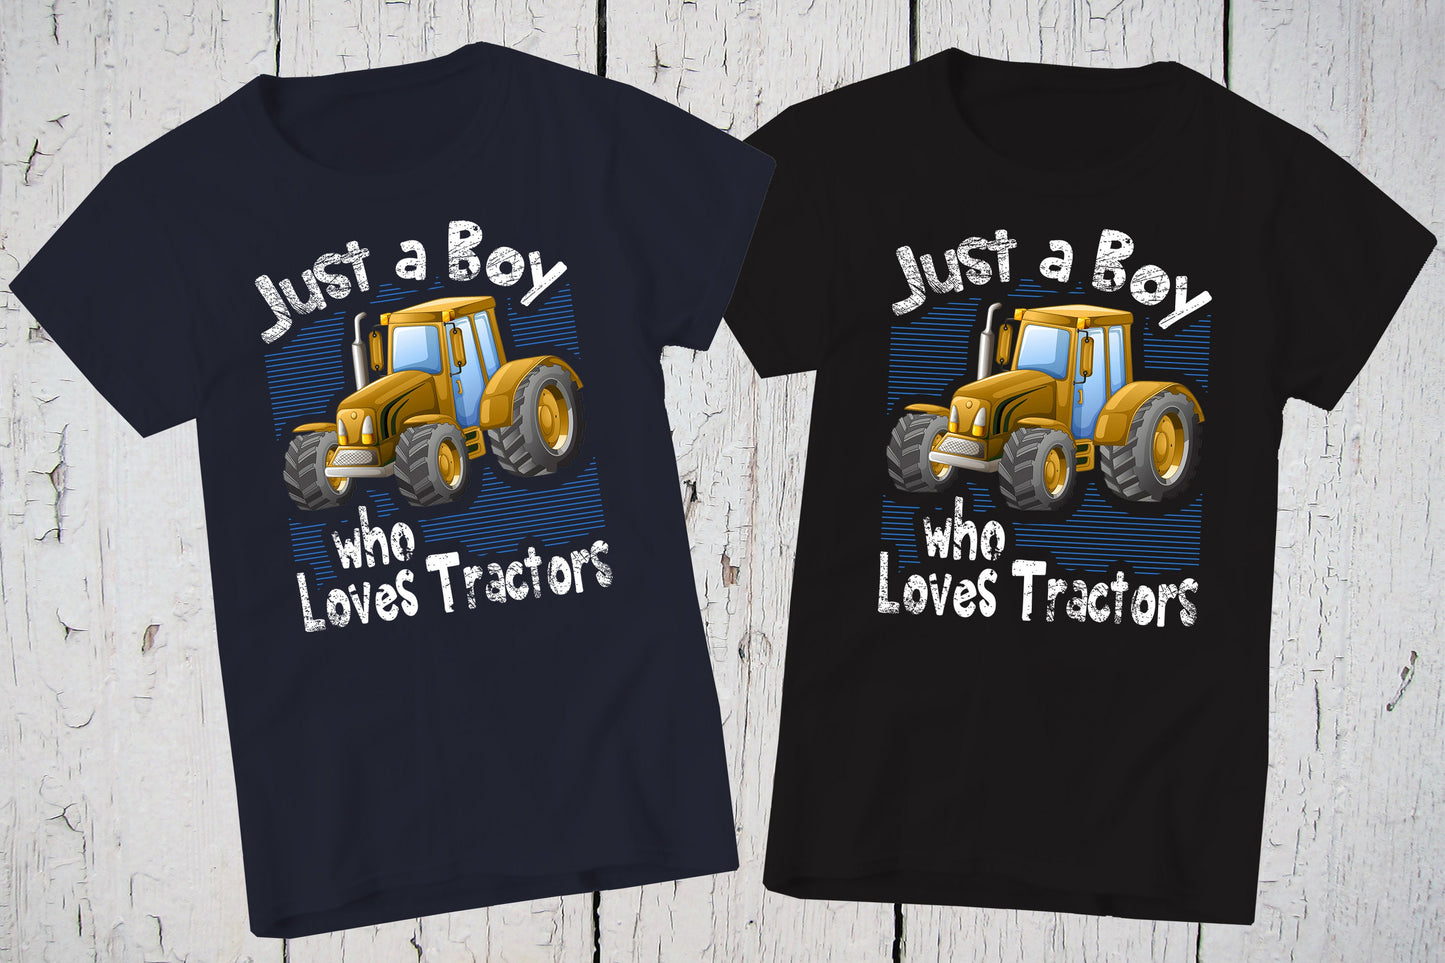 Just A Boy Who Loves Yellow Tractors, Tractor Shirt, Tractor Birthday, Tractor Party, Farm Party, Yellow Tractor Shirt, Tractor Tee for Boy